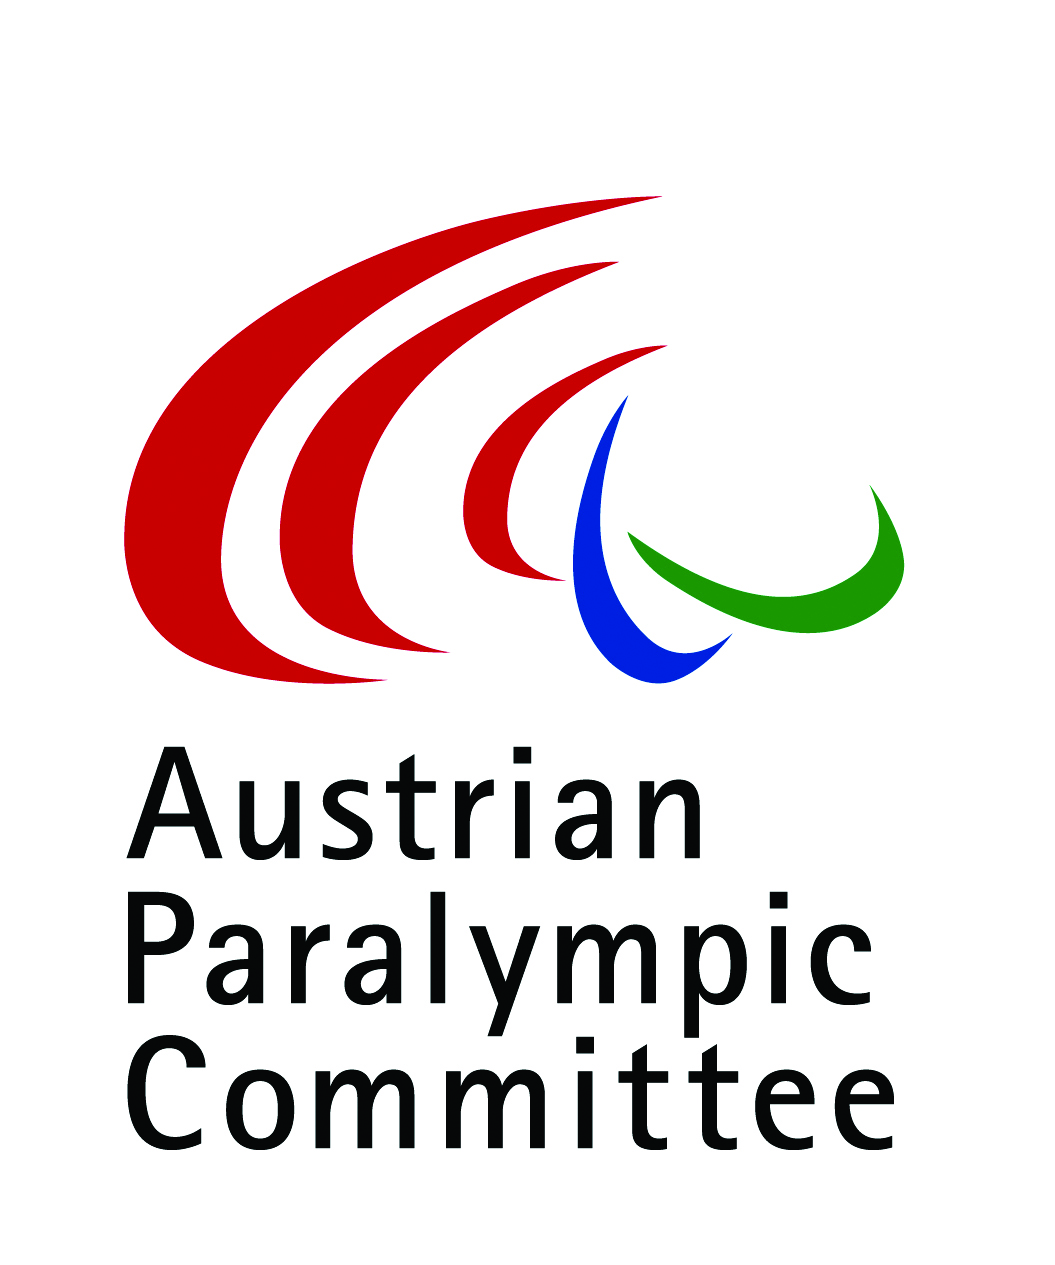 Austrian Paralympic Committee discusses Tokyo 2020 postponement at latest meeting